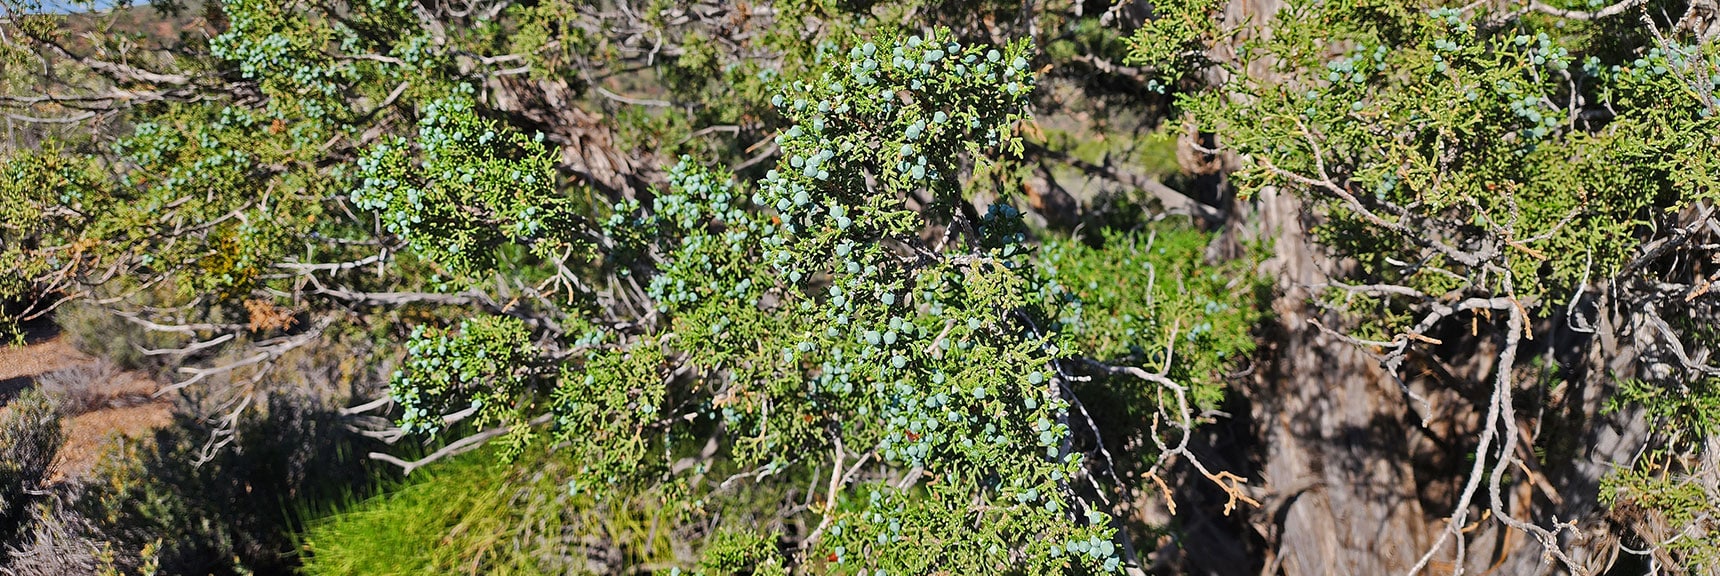 Collecting Now, Will Identify Later | Plants Above 5000ft | LasVegasAreaTrails.com | Southwestern US | Lovell Canyon, Nevada